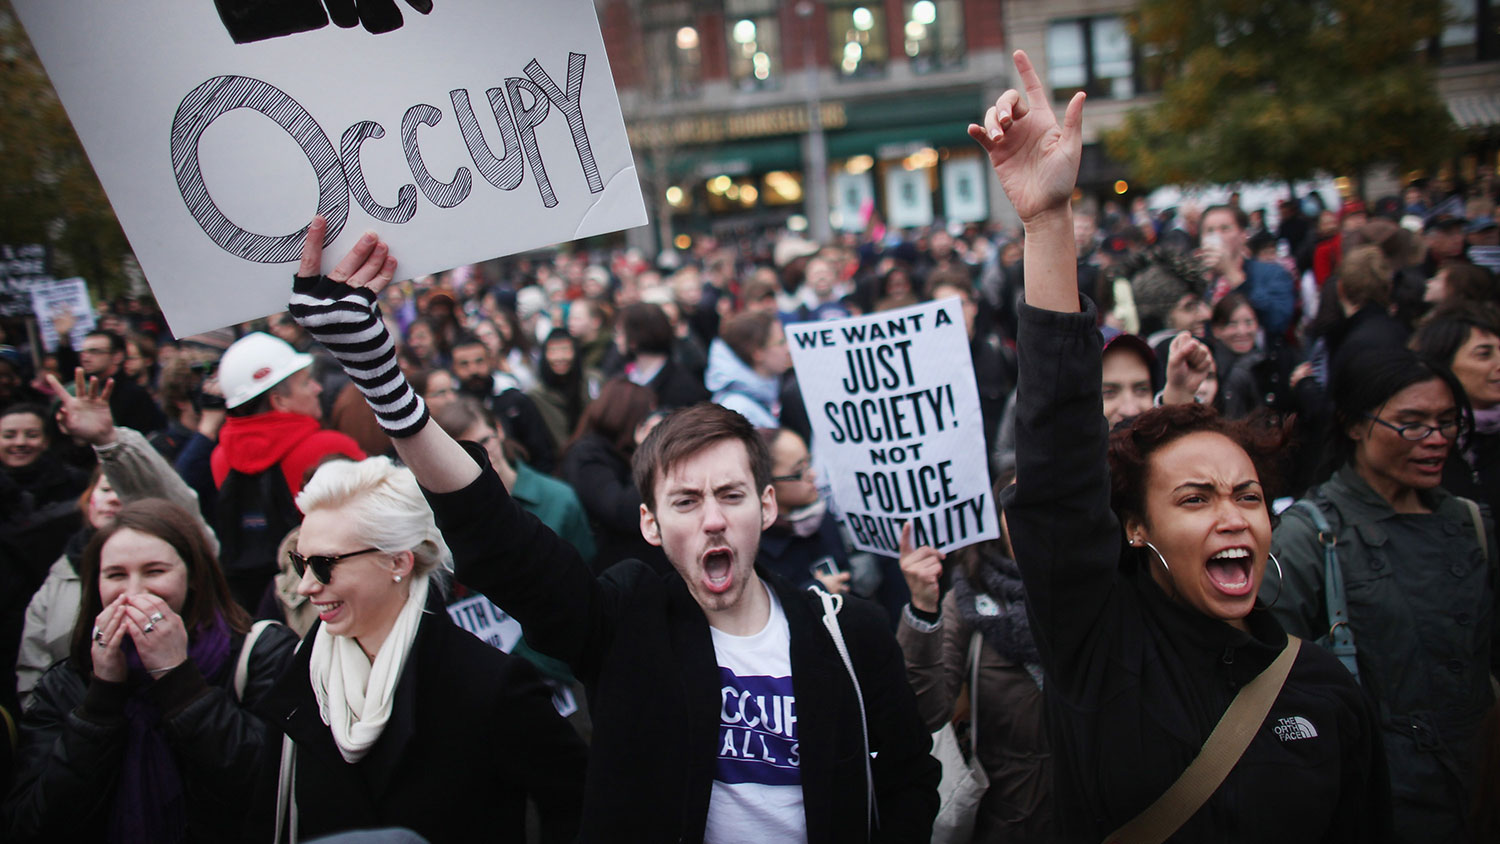 A large gathering of protesters affiliated with the Occupy Wall Street movement attend a rally on Nov. 17, 2011, in New York City.
